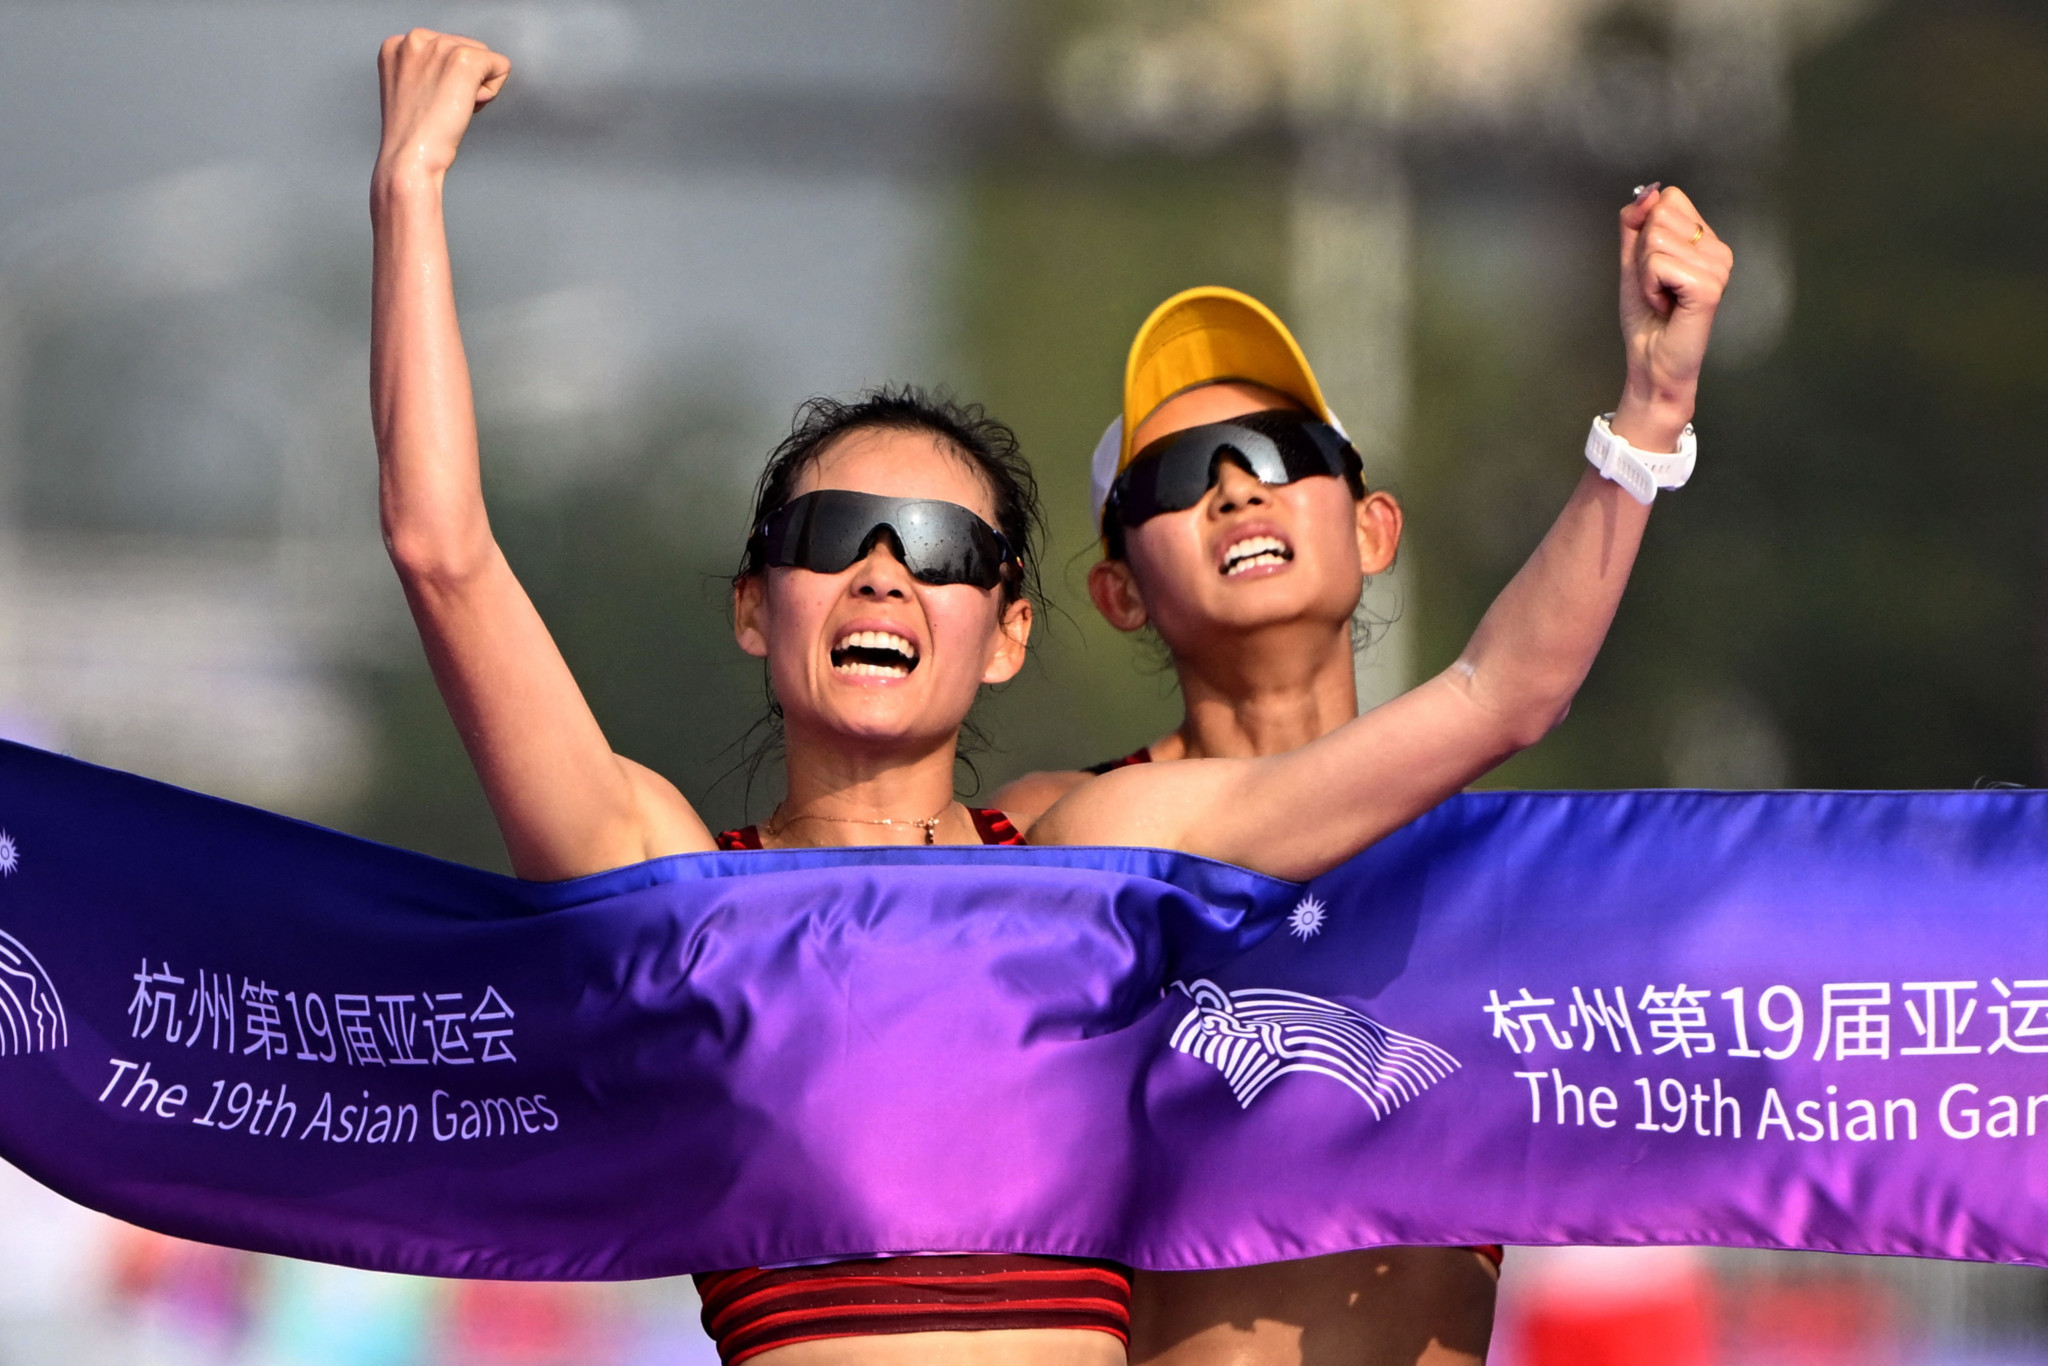 Athletics events made their first appearance today and saw Yang Jiayu, left, pip her compatriot Ma Zhenxia at the line for race walk gold ©Getty Images